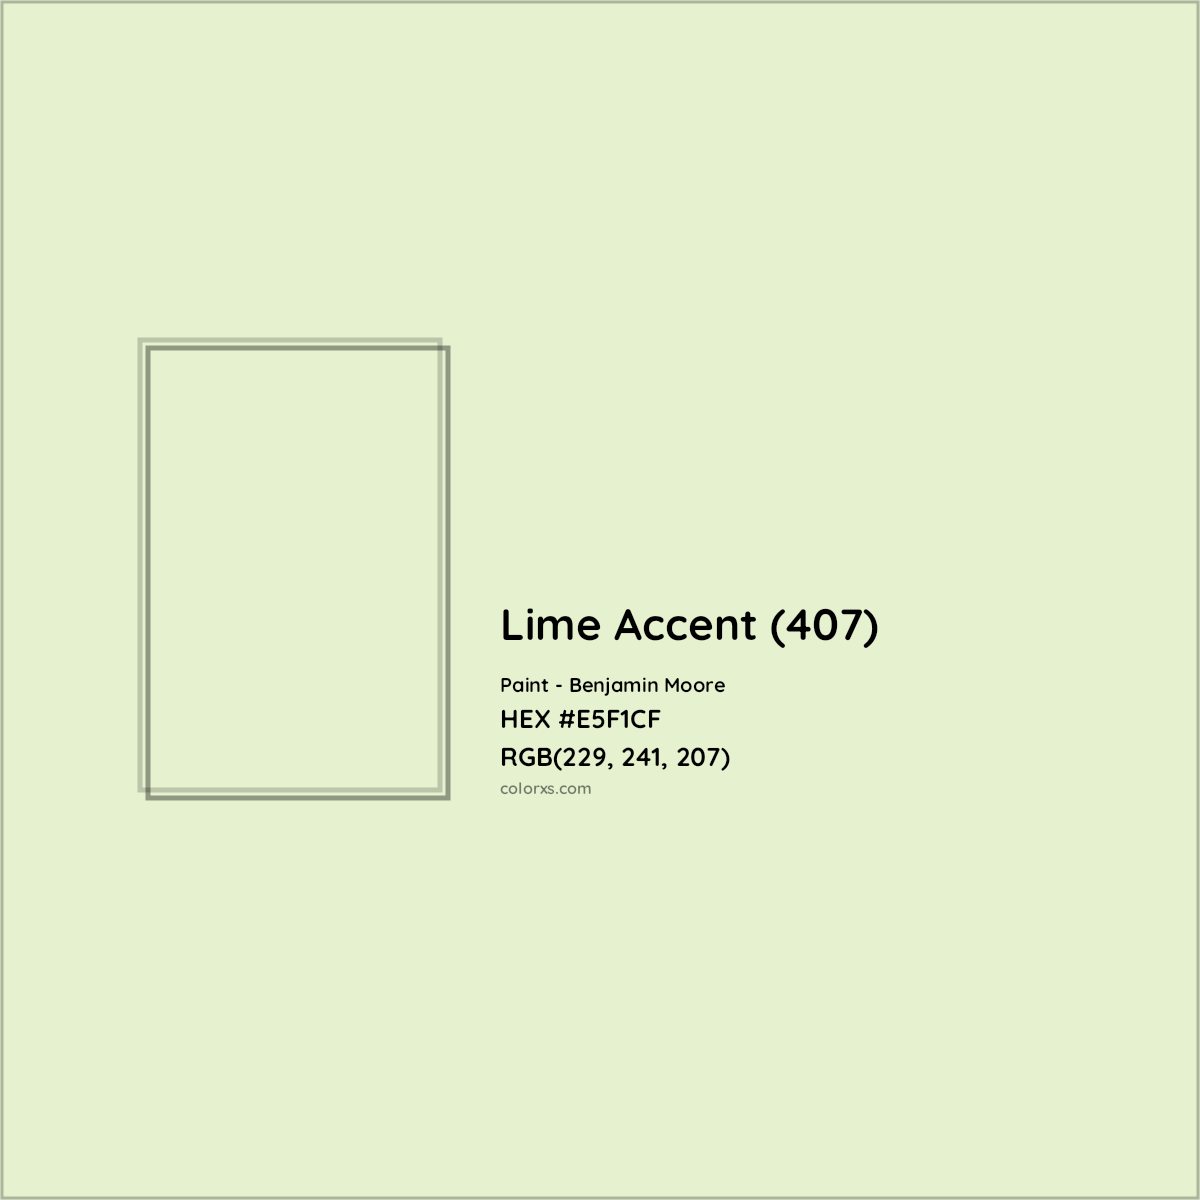 HEX #E5F1CF Lime Accent (407) Paint Benjamin Moore - Color Code